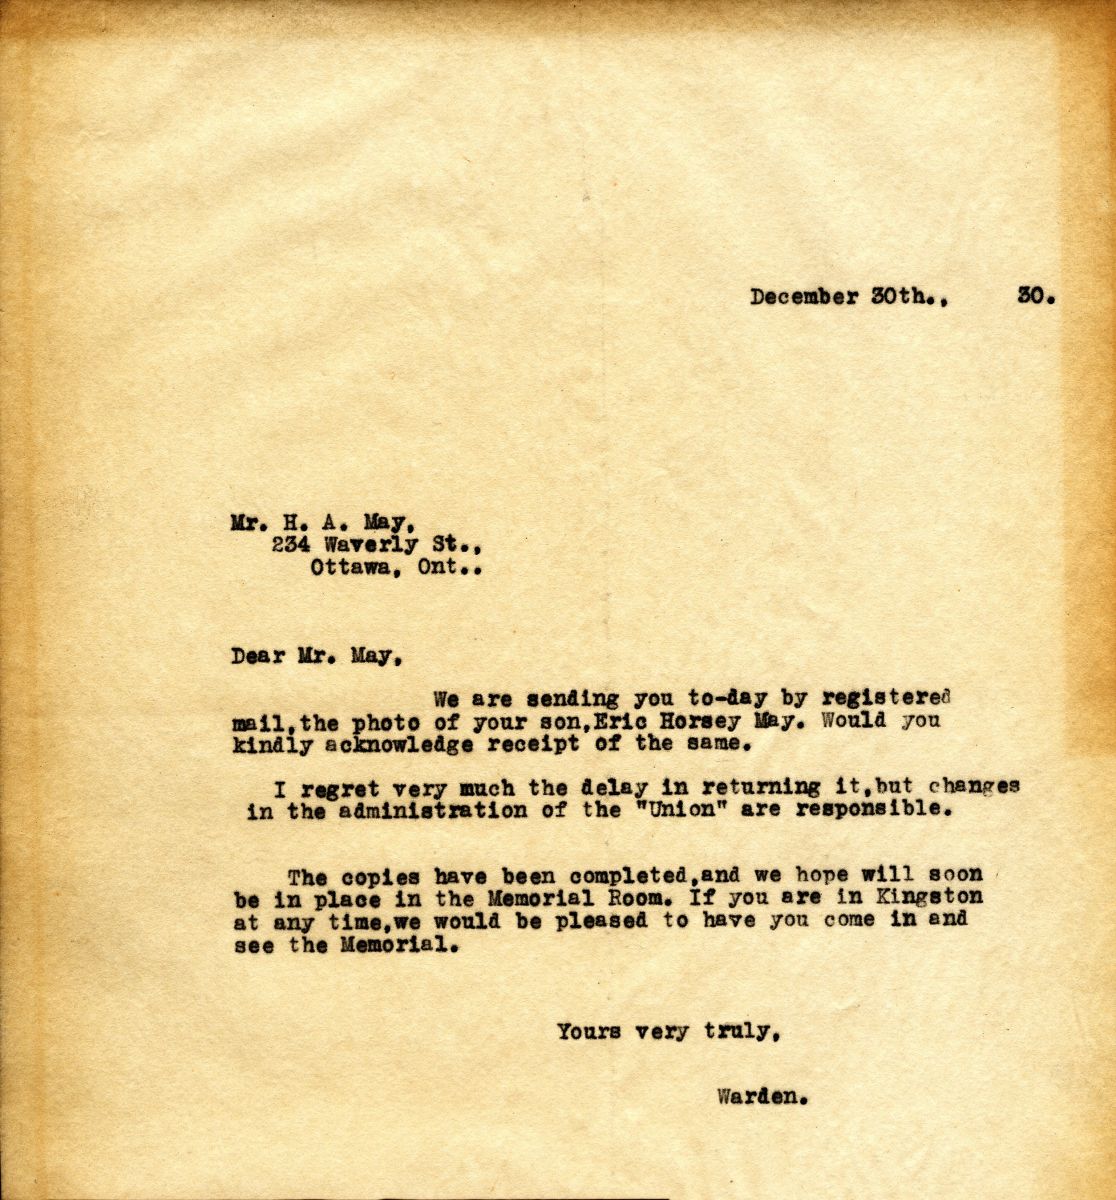 Letter from the Warden to Mr. H.A. May, 30th December 1930